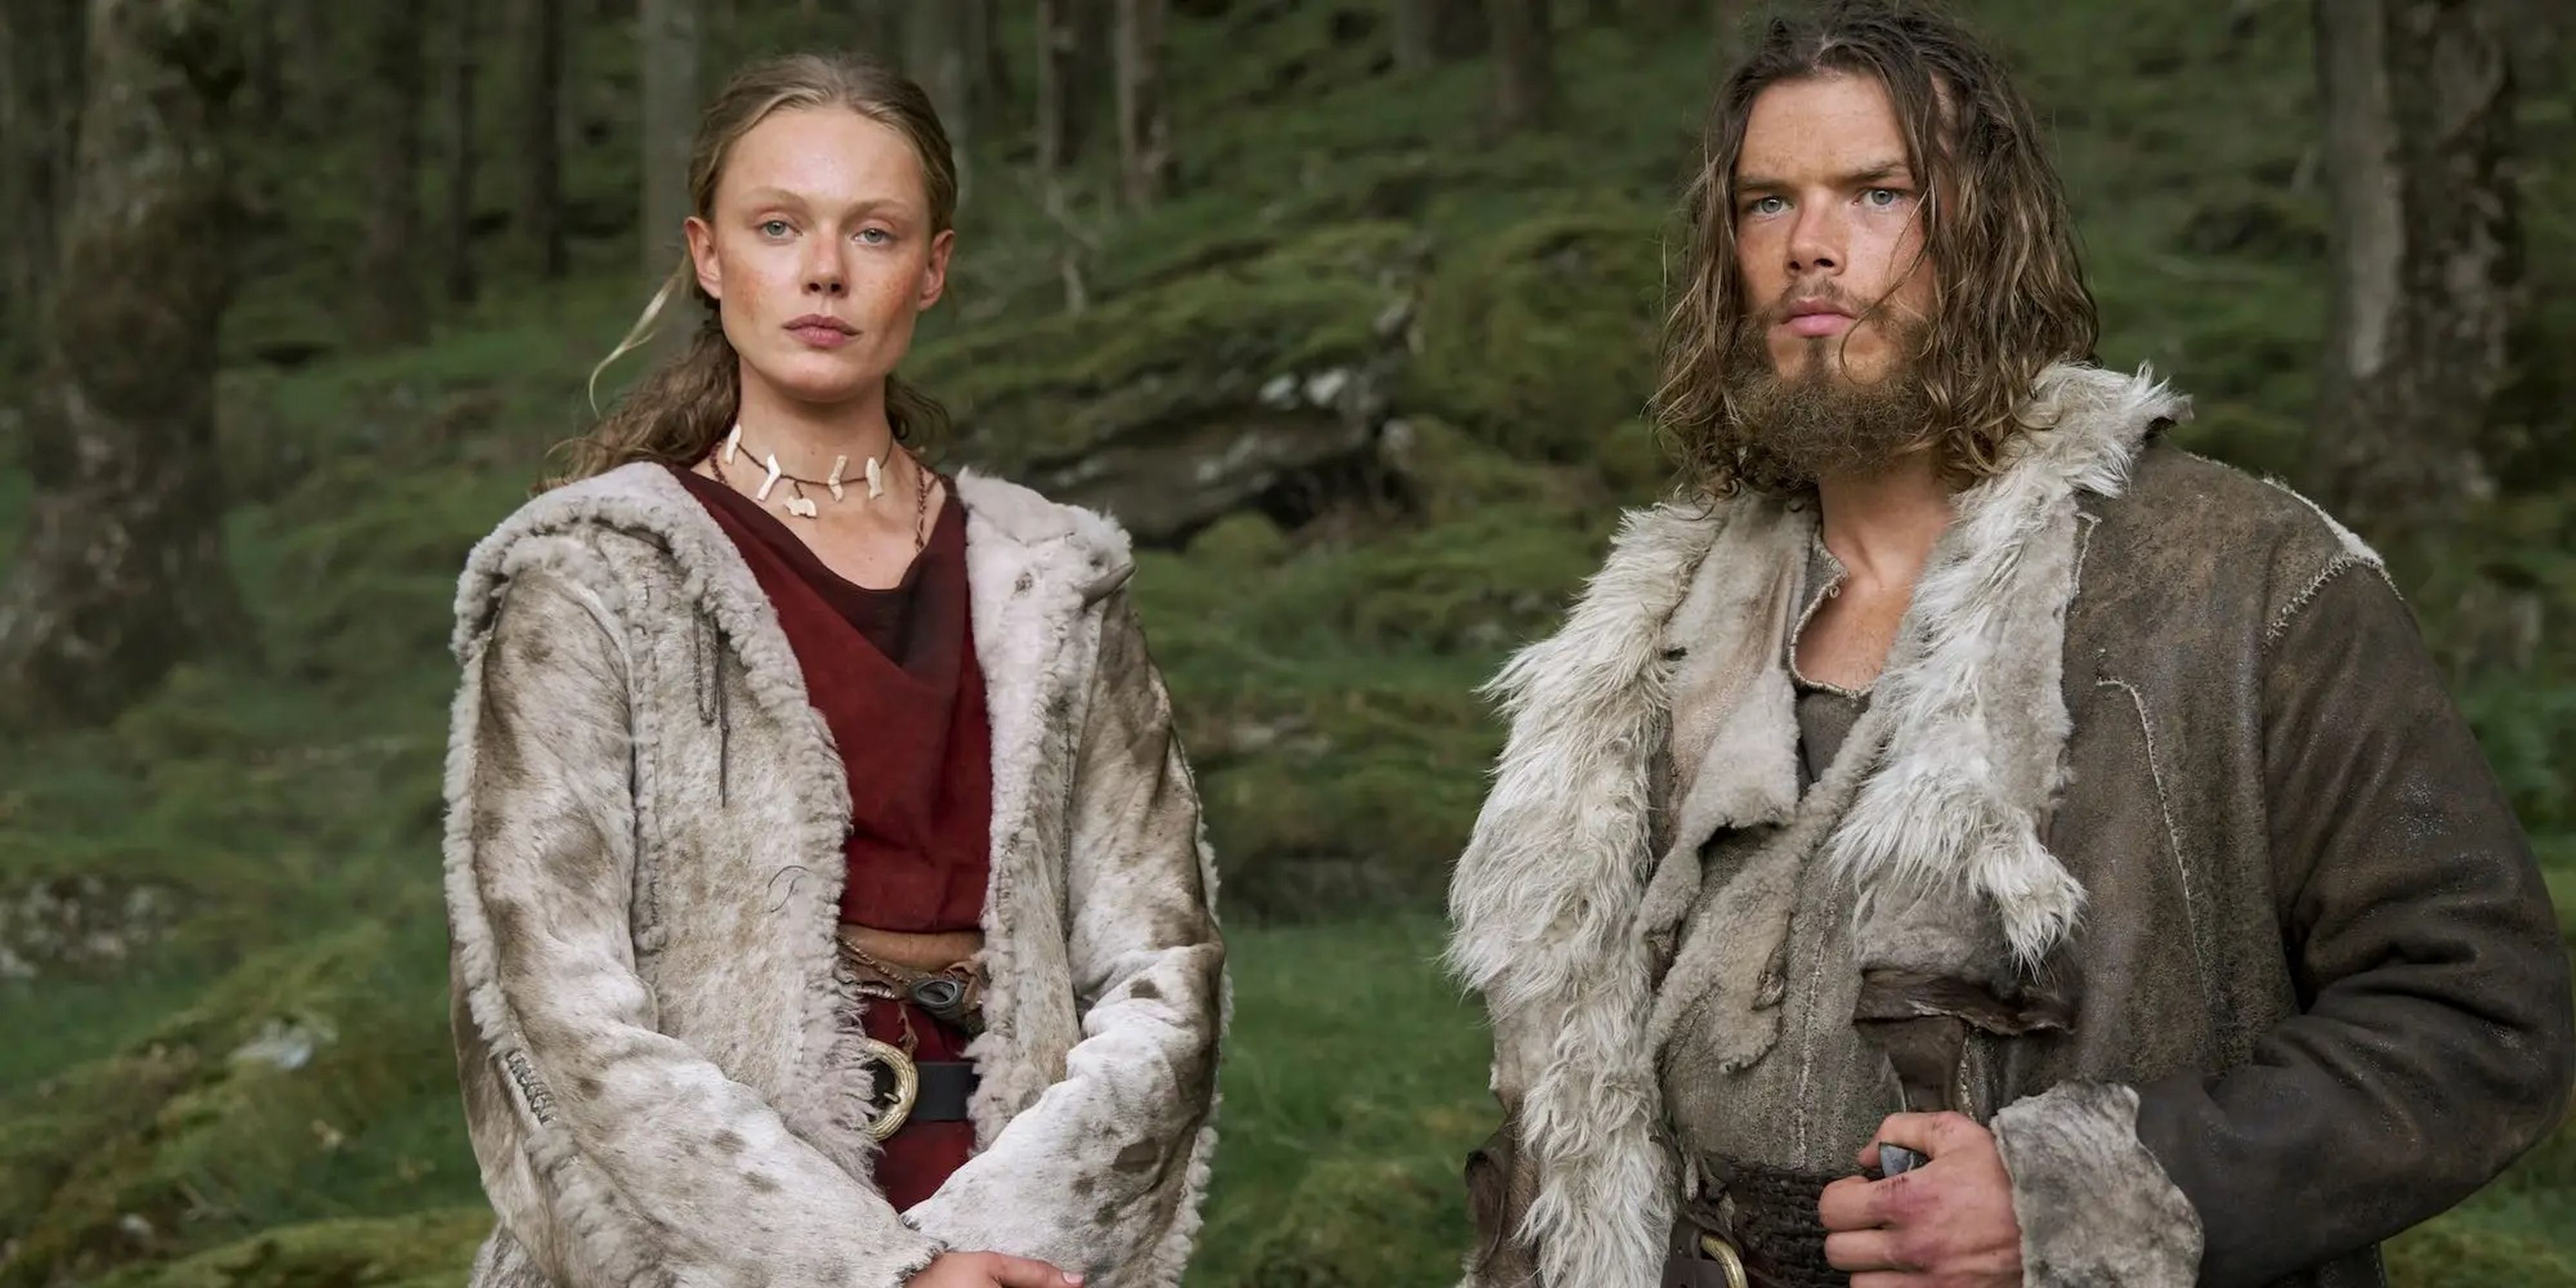 (L to R) Frida Gustavsson as Freydis, Sam Corlett as Leif in episode 101 of "Vikings: Valhalla."